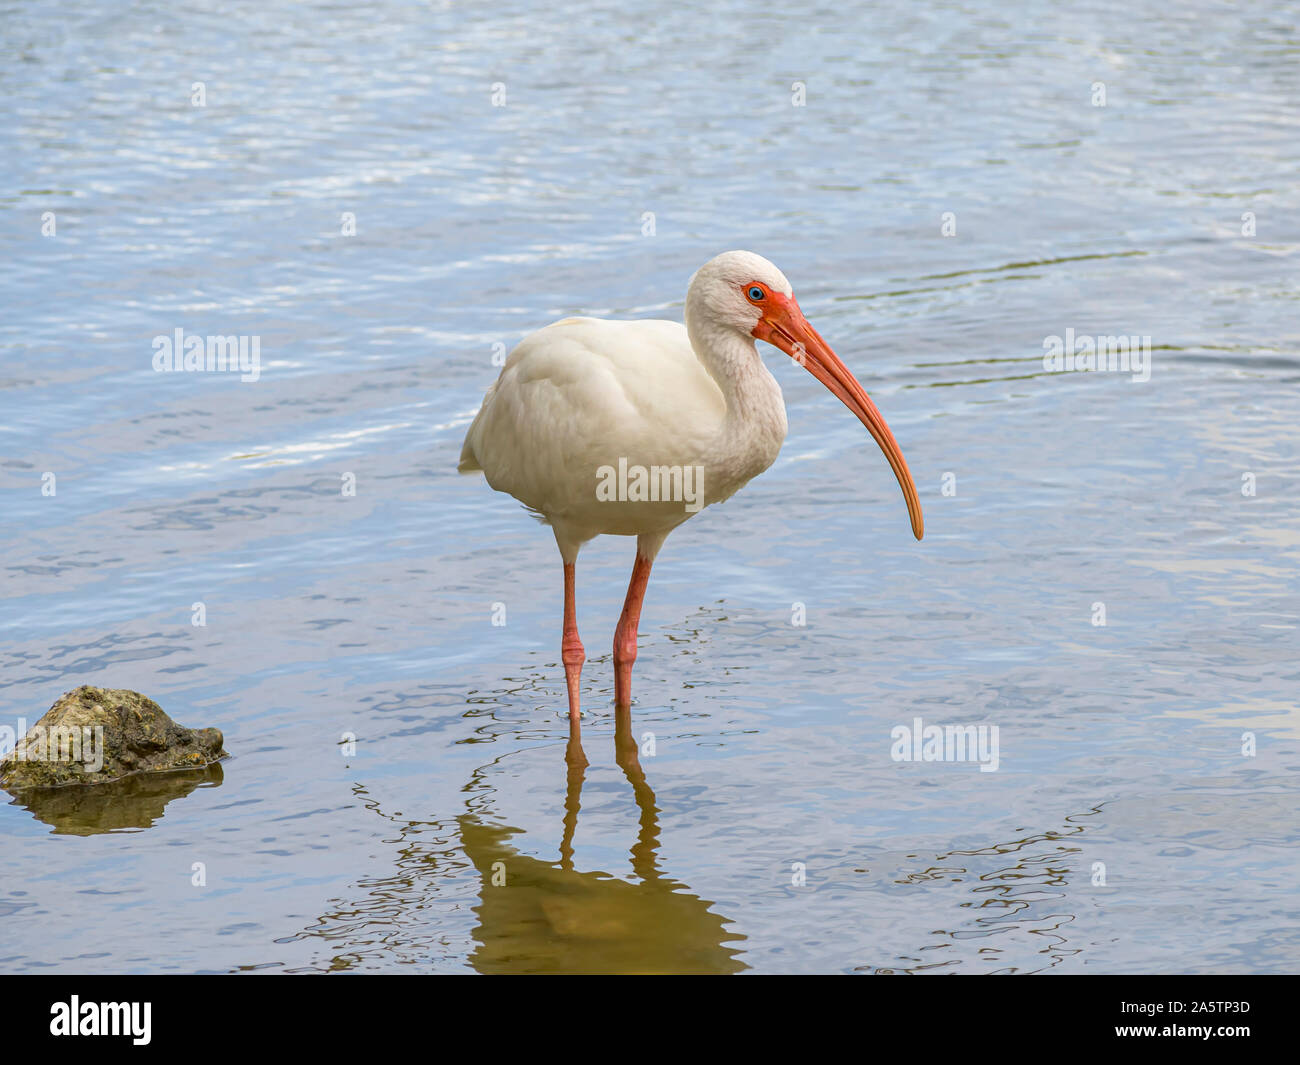 An American white ibis, Eudocimus albus, stands in the water at the edge of a pond. Lakeview park in Corpus Christi, Texas USA. Stock Photo